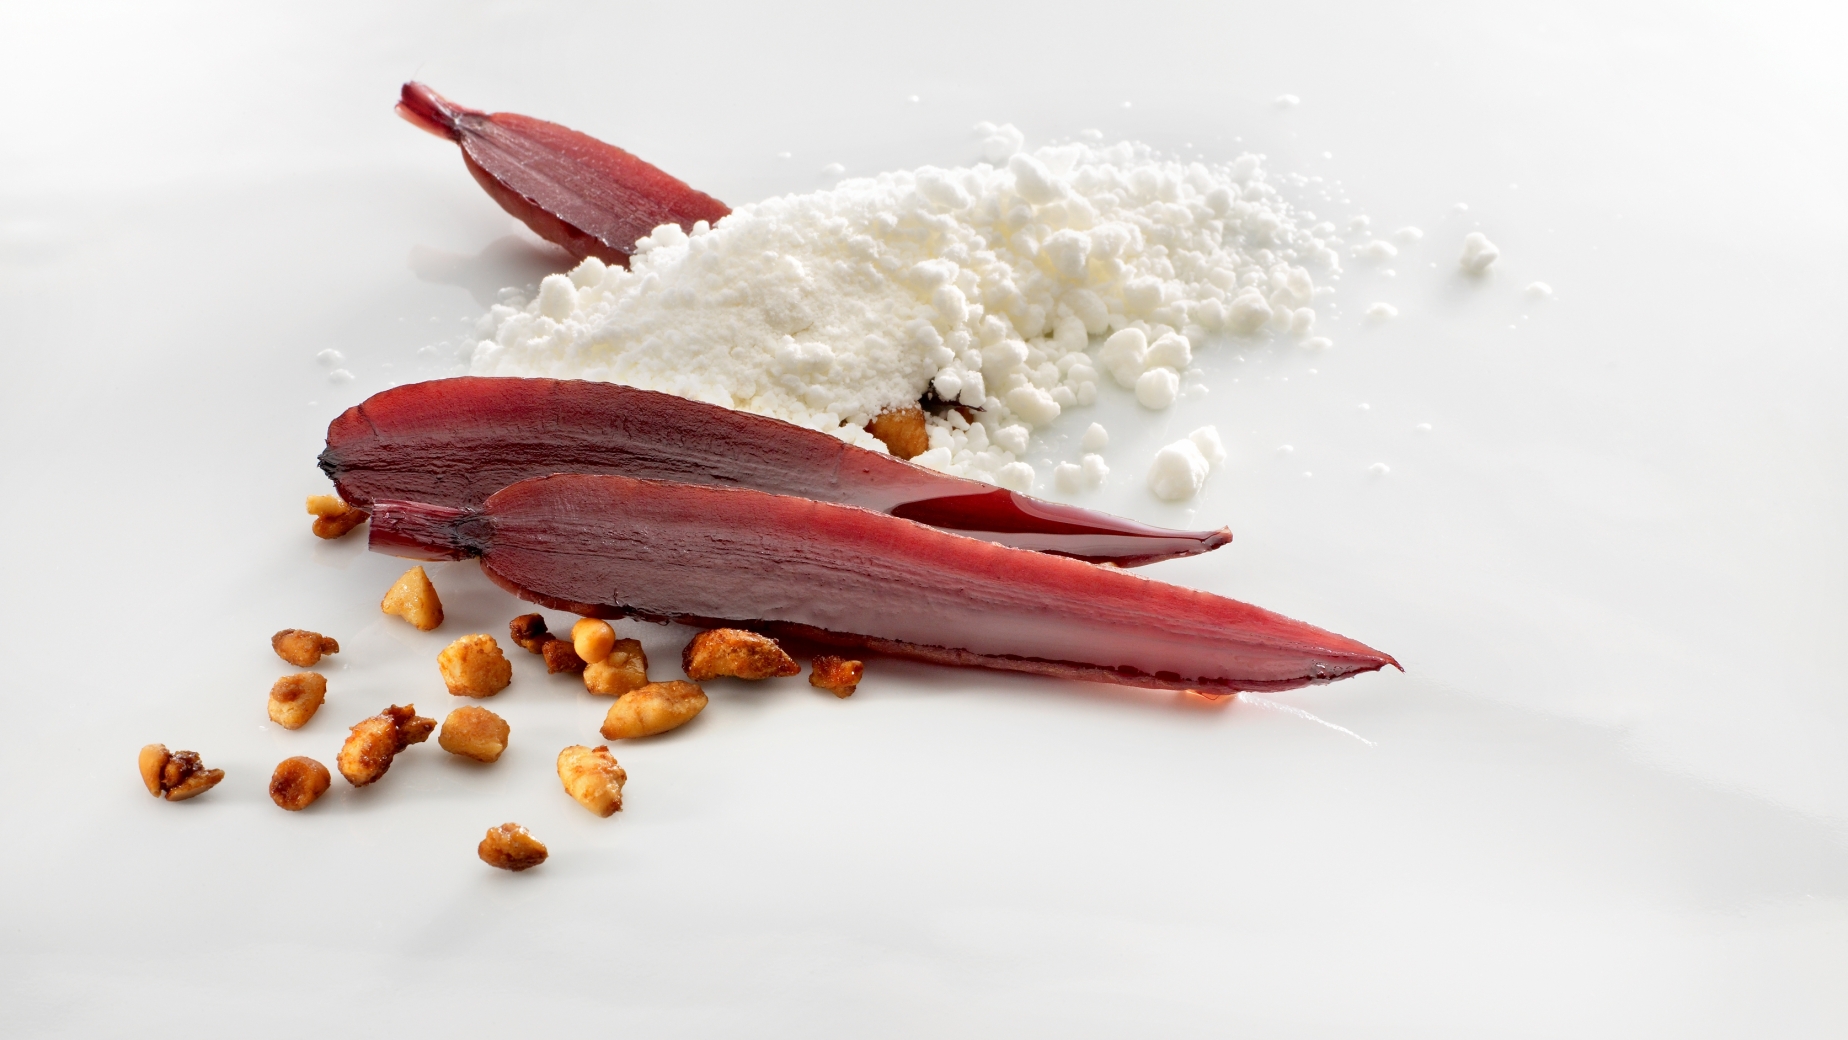 Purple carrot cooked in a coating of a natural sugar cane and vanilla paste. powdered goat?s cheese ice-cream. a base of sugar-frosted se
PHOTO: José Luis López de Zubiría / Mugaritz